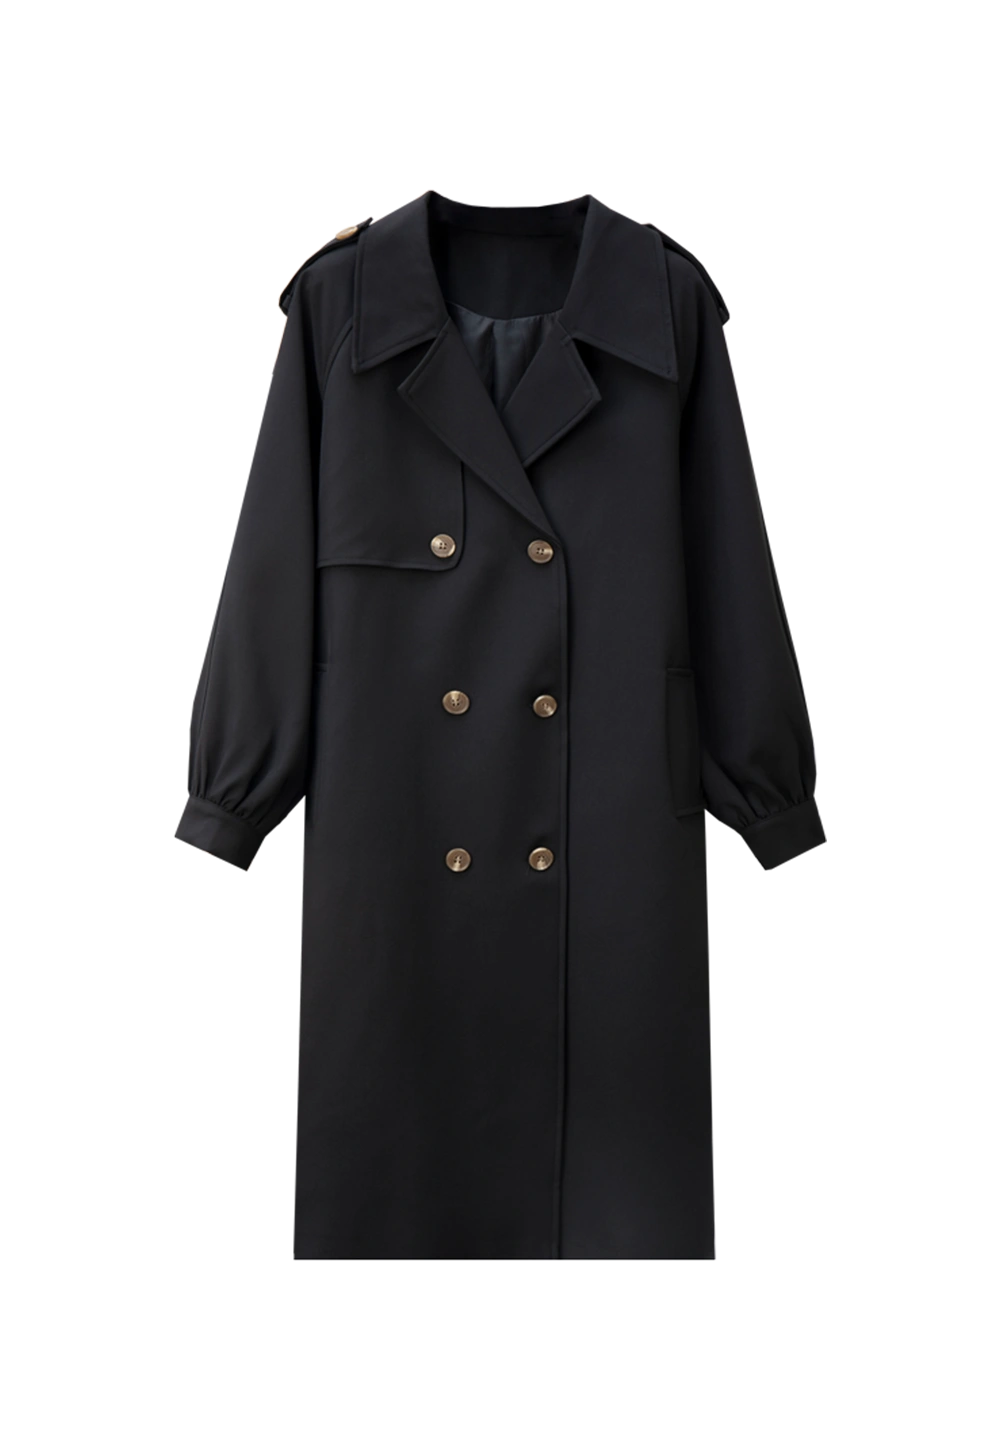 Elegant Women's Double-Breasted Trench Coat